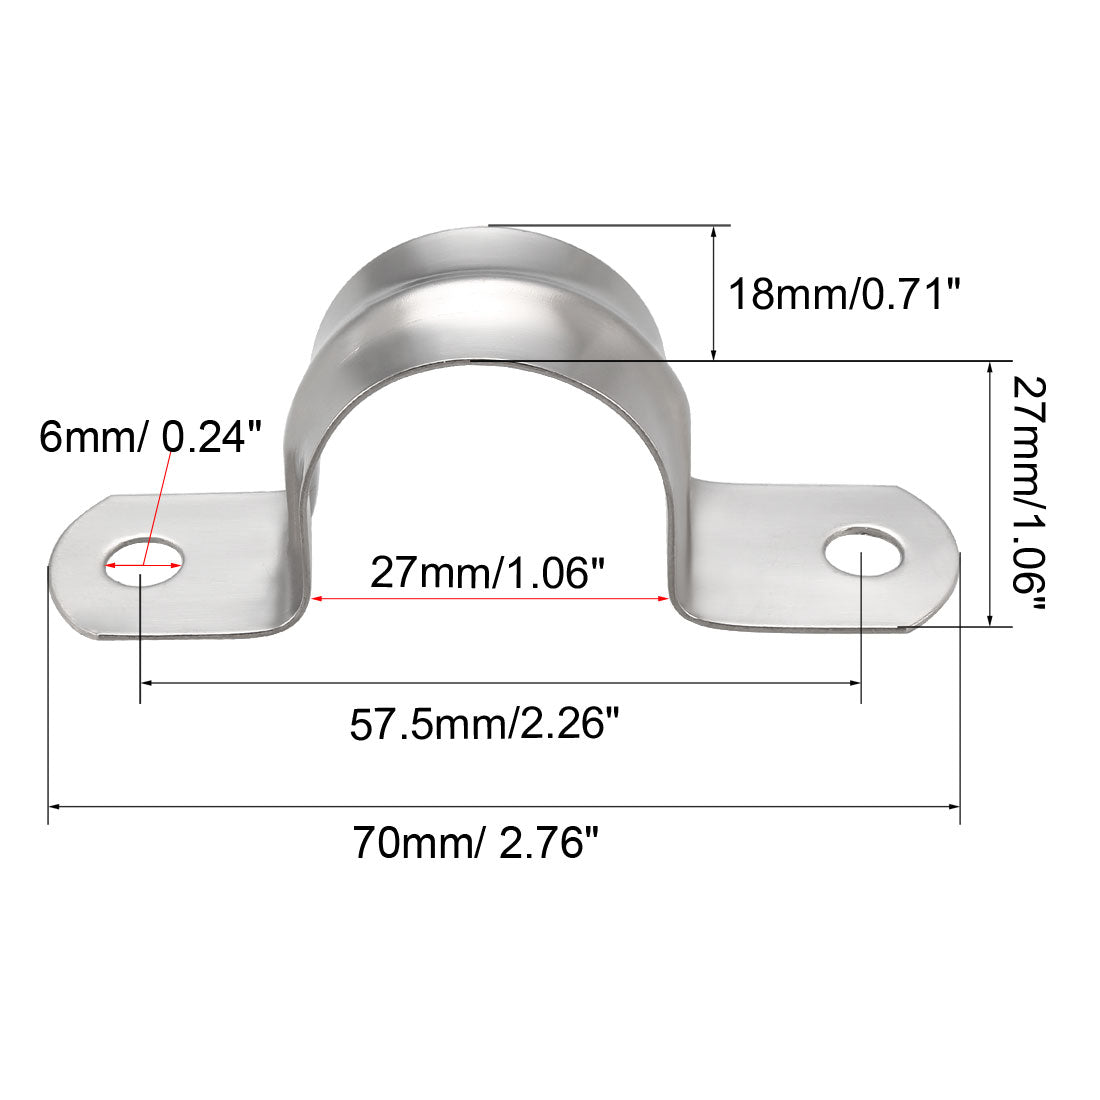 Uxcell Uxcell 70mm(2.8") Rigid Pipe Strap, 2 Holes 304 Stainless Steel Tension Clip 2pcs